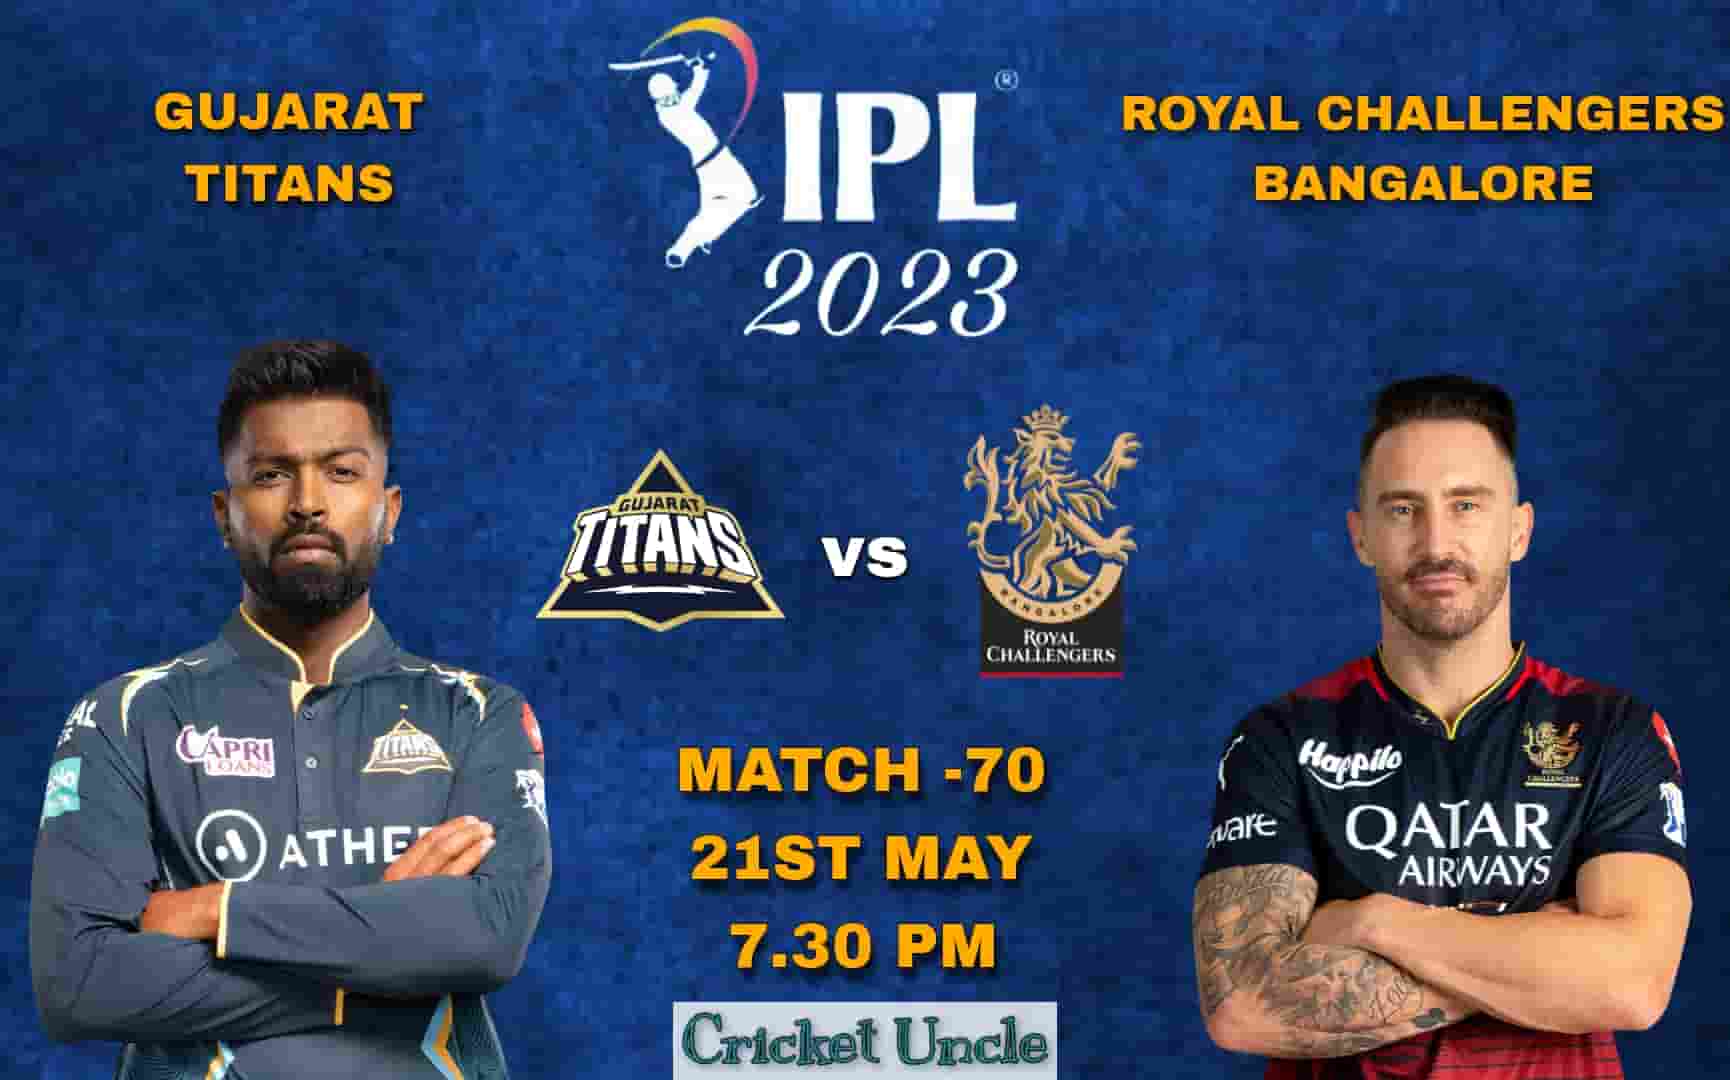 Poster of IPL 2023 match 70 between Gujarat Titans and Royal Challengers Bangalore